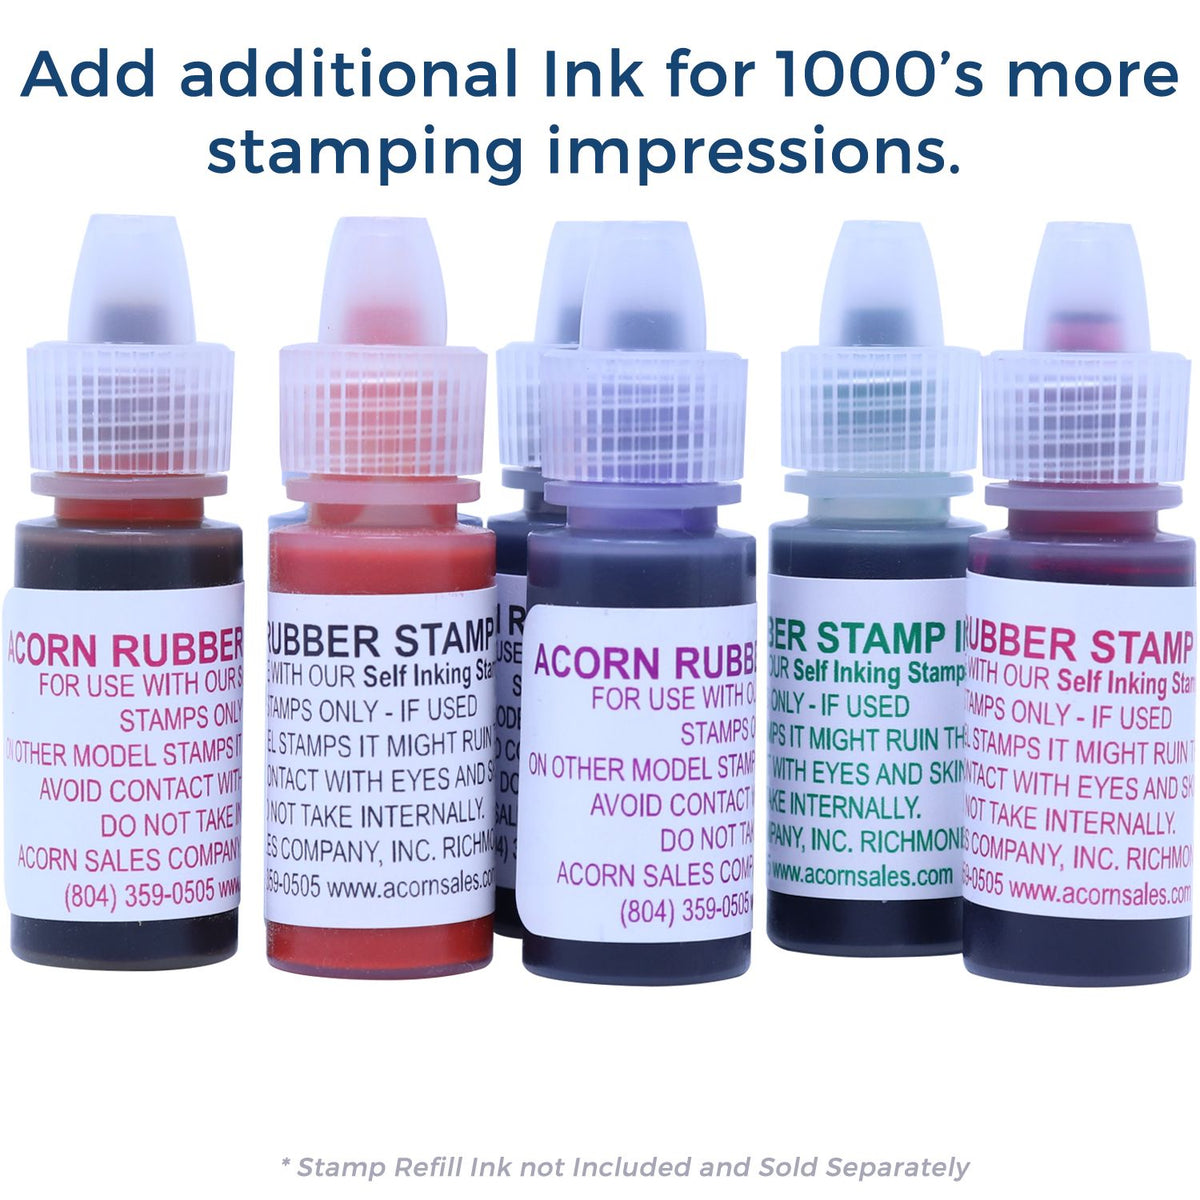 Refill Ink for Self-Inking Round Great Job Stamp Available